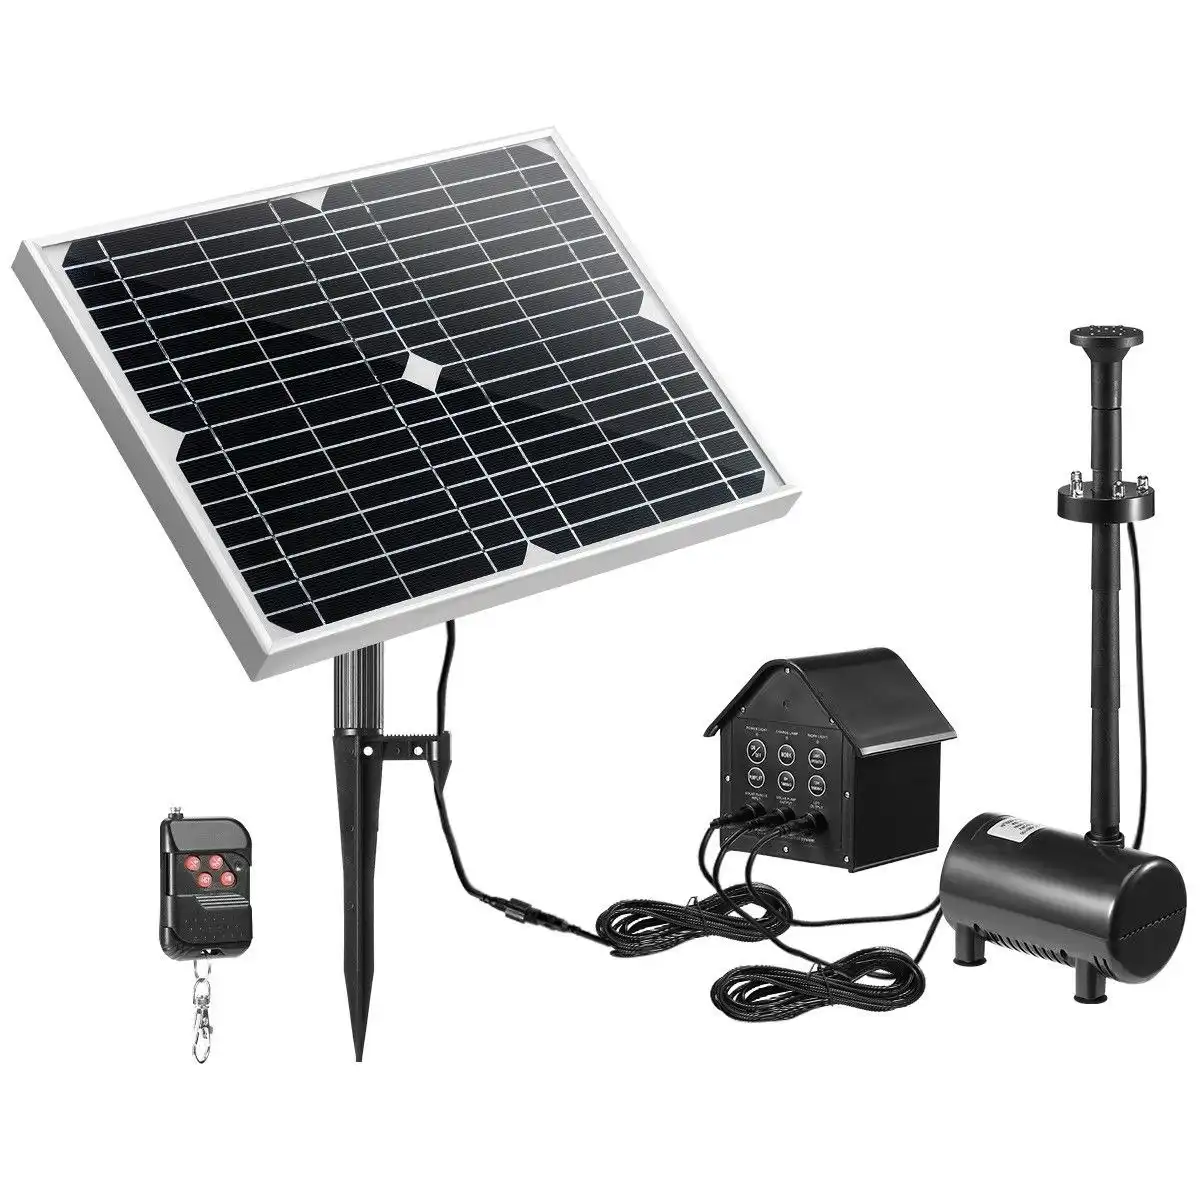 Ausway 70W Solar Fountain Water Pump with Battery and LED Light for Birdbath Garden Pool